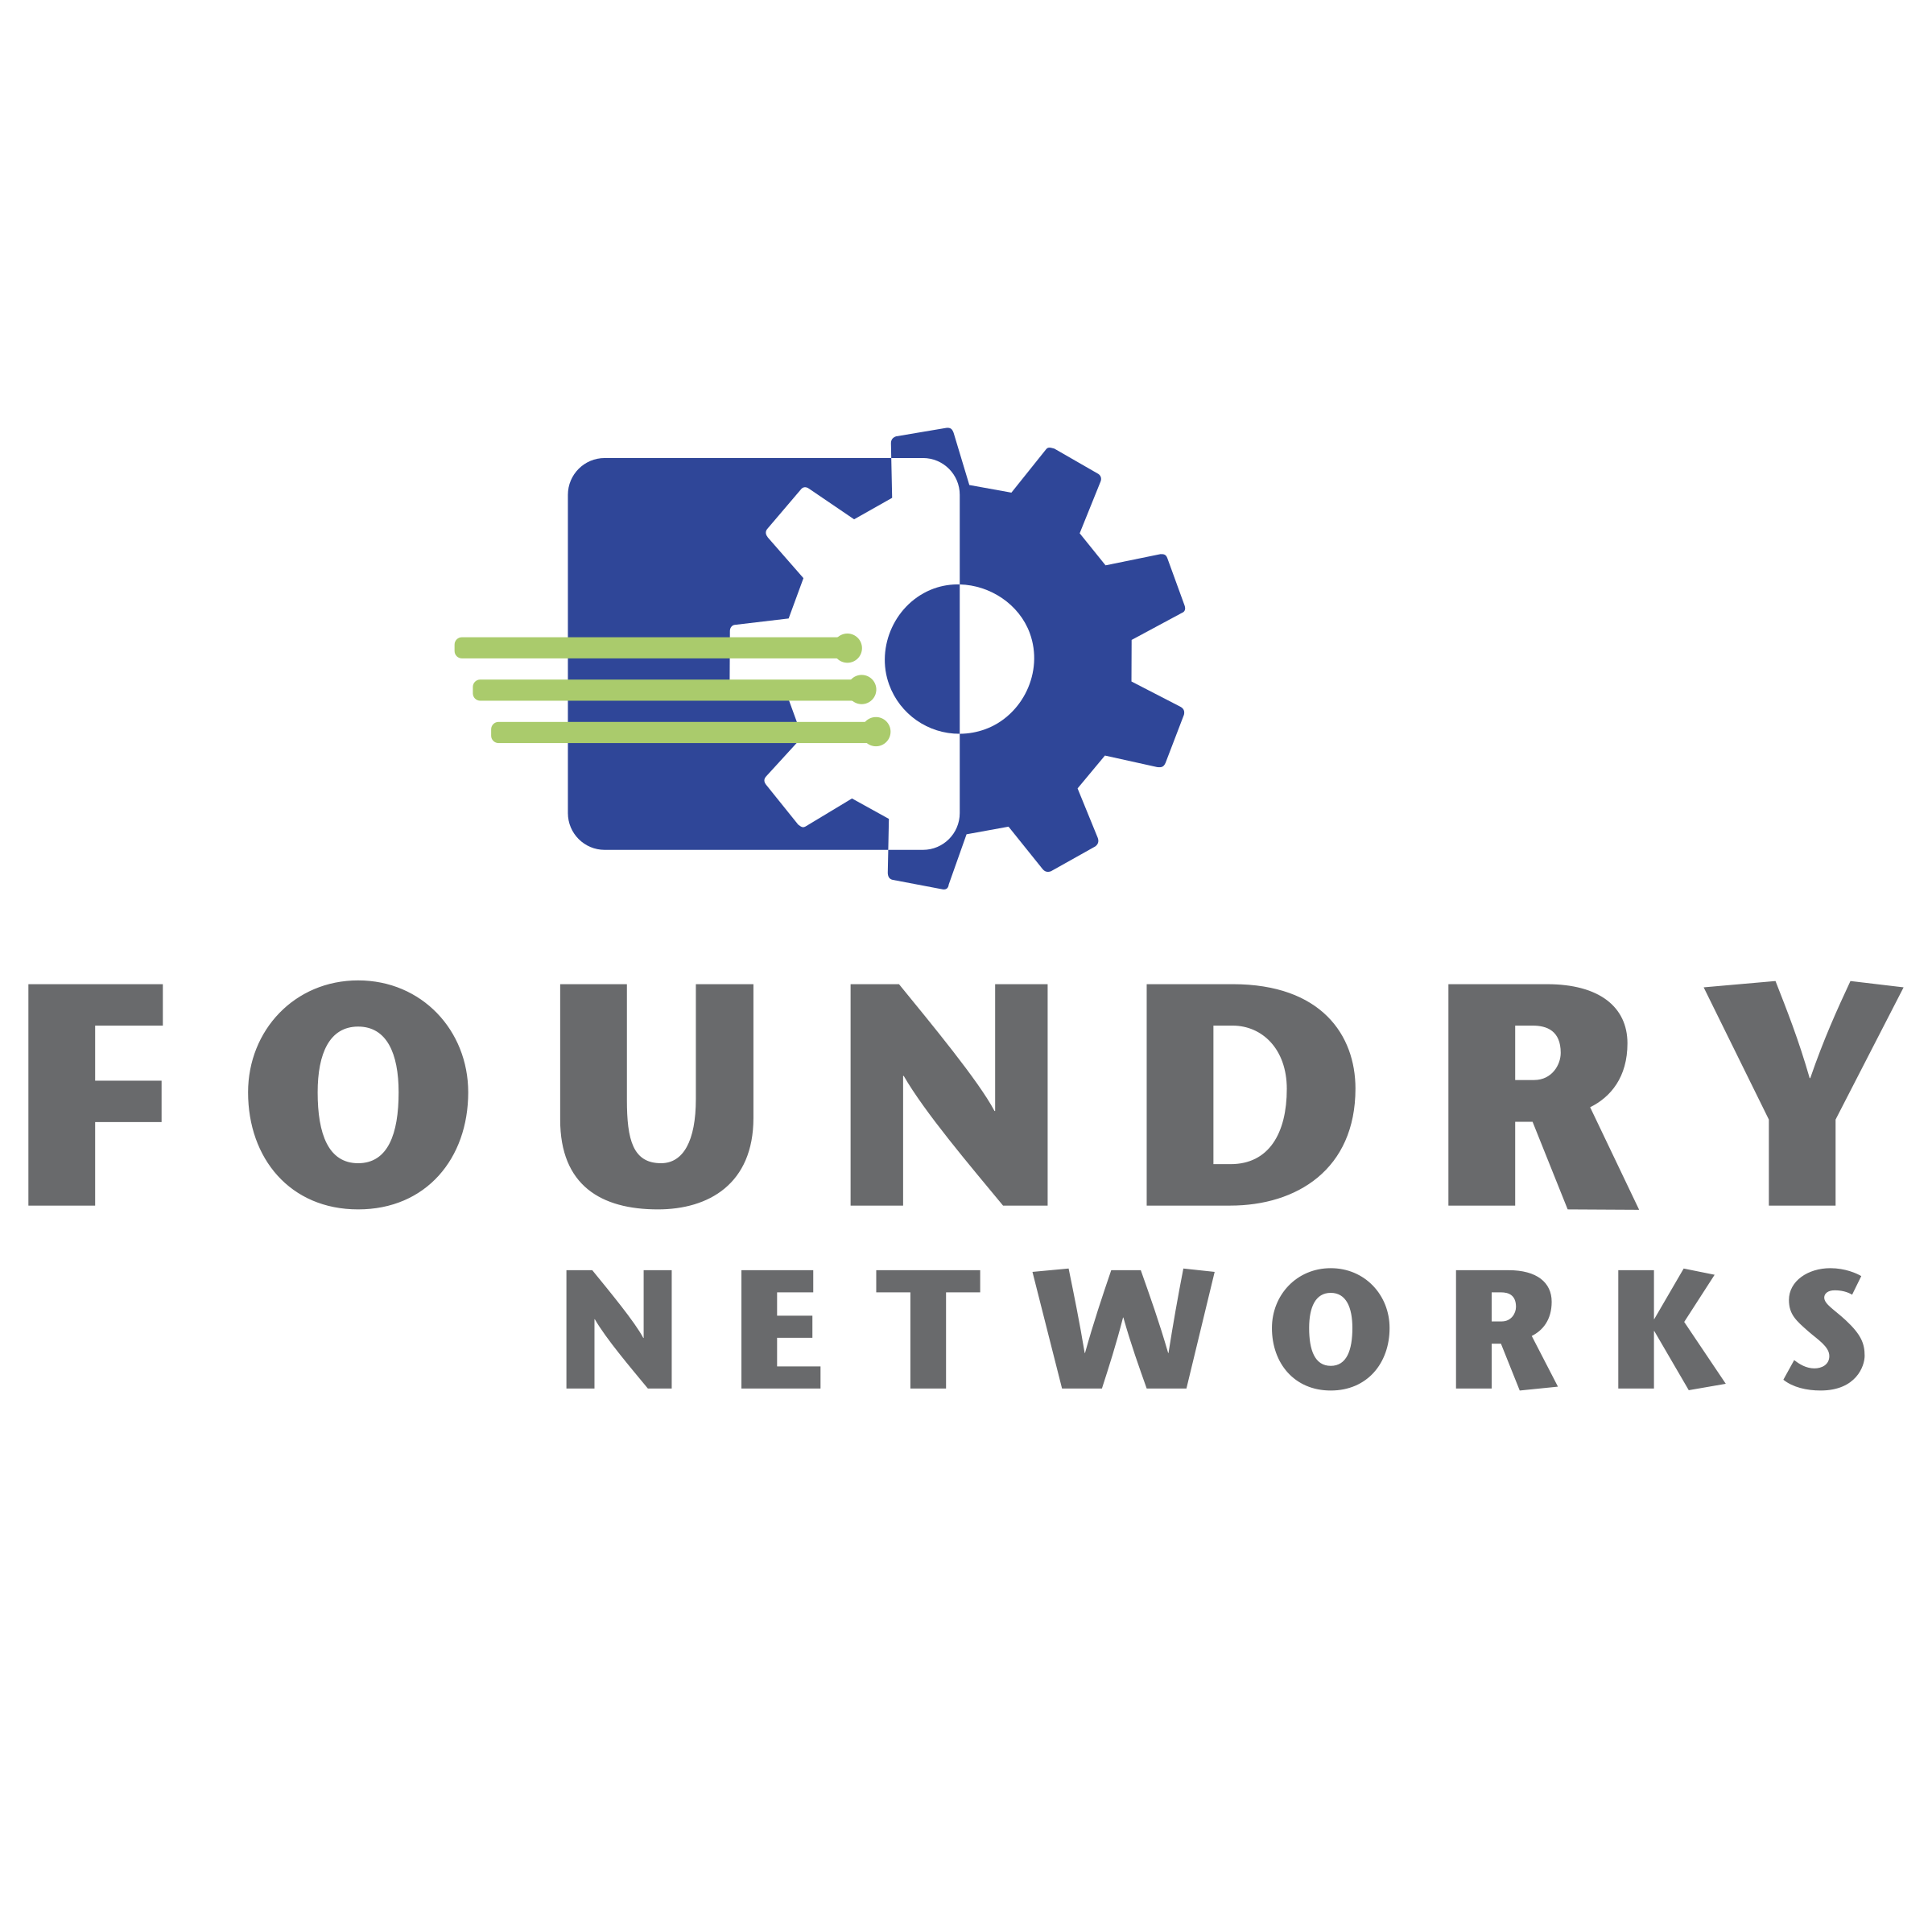 Foundry Networks